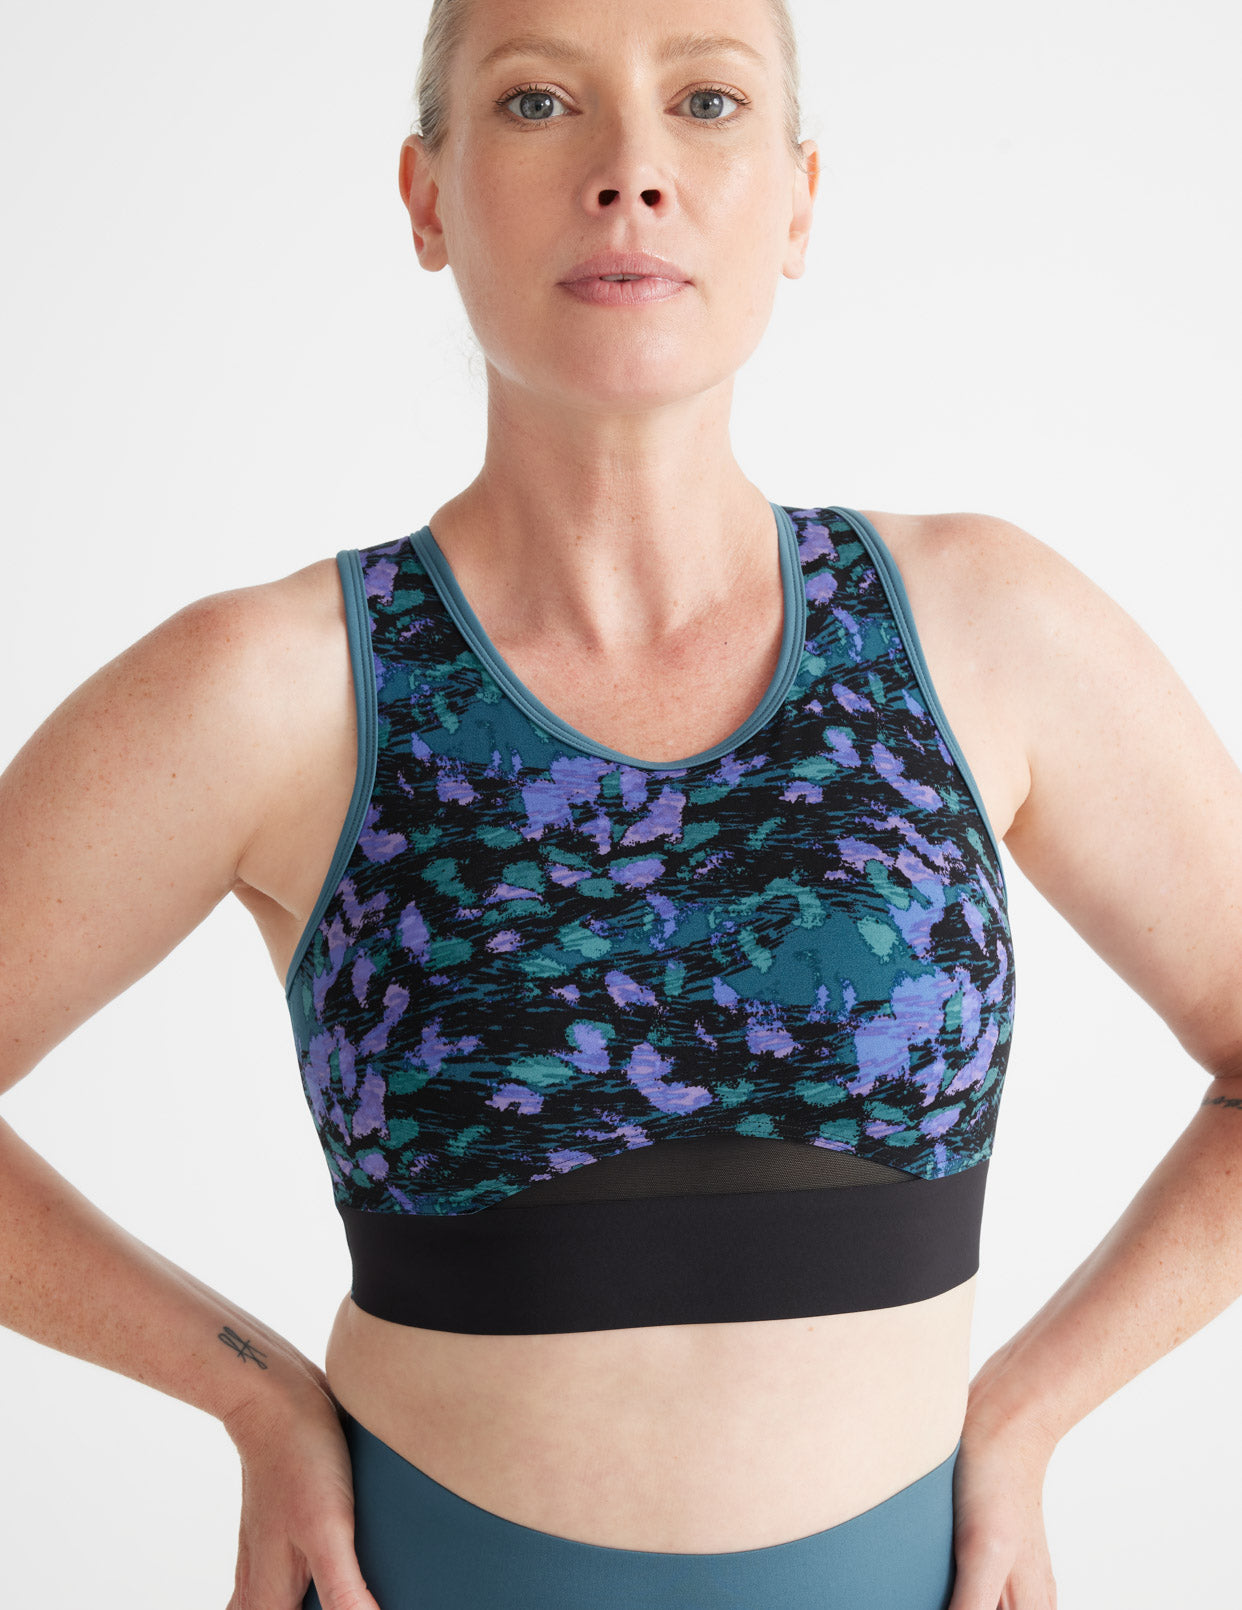 Knix LuxeLift Pullover Bra - $40 - From Katherine